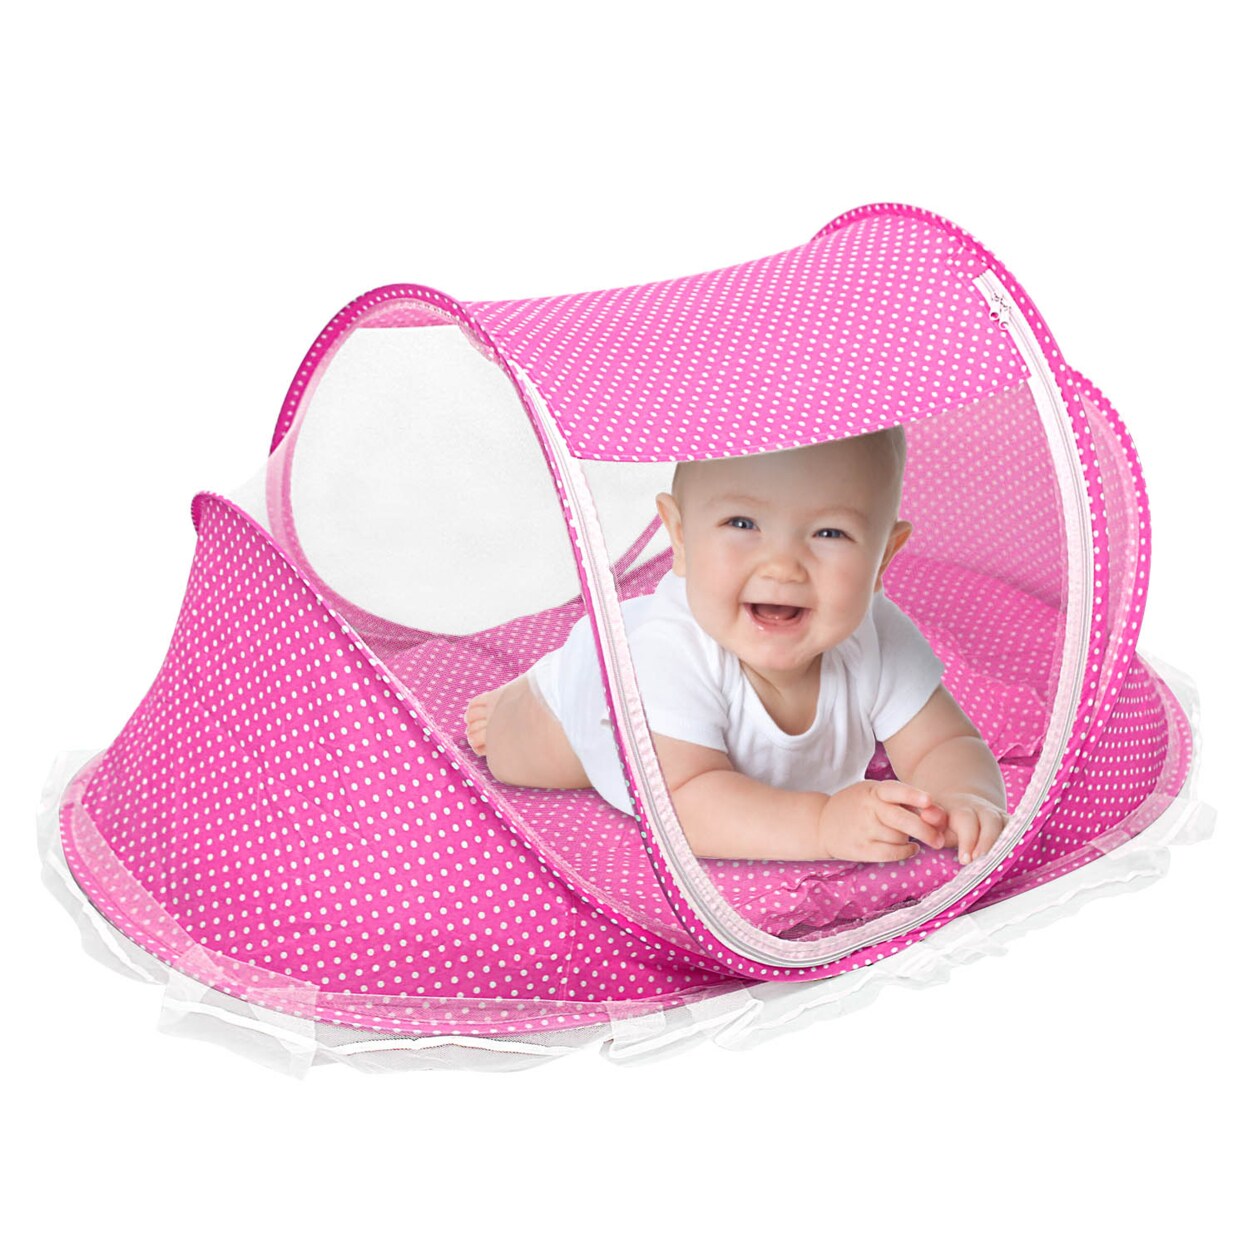 Global Phoenix Foldable Baby Travel Bed Portable Infant Mosquito Net Tent